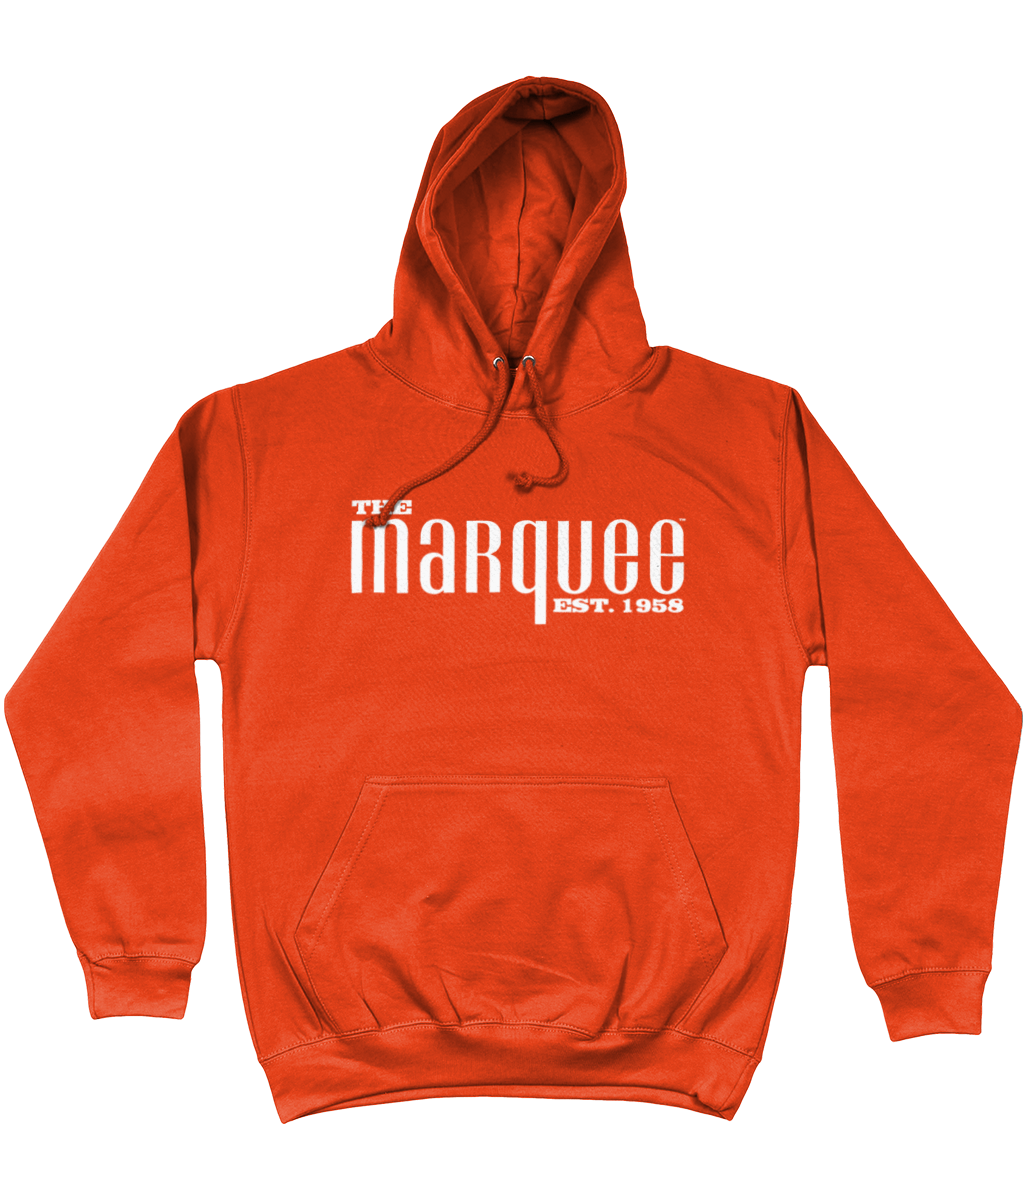 The Marquee Hoodie